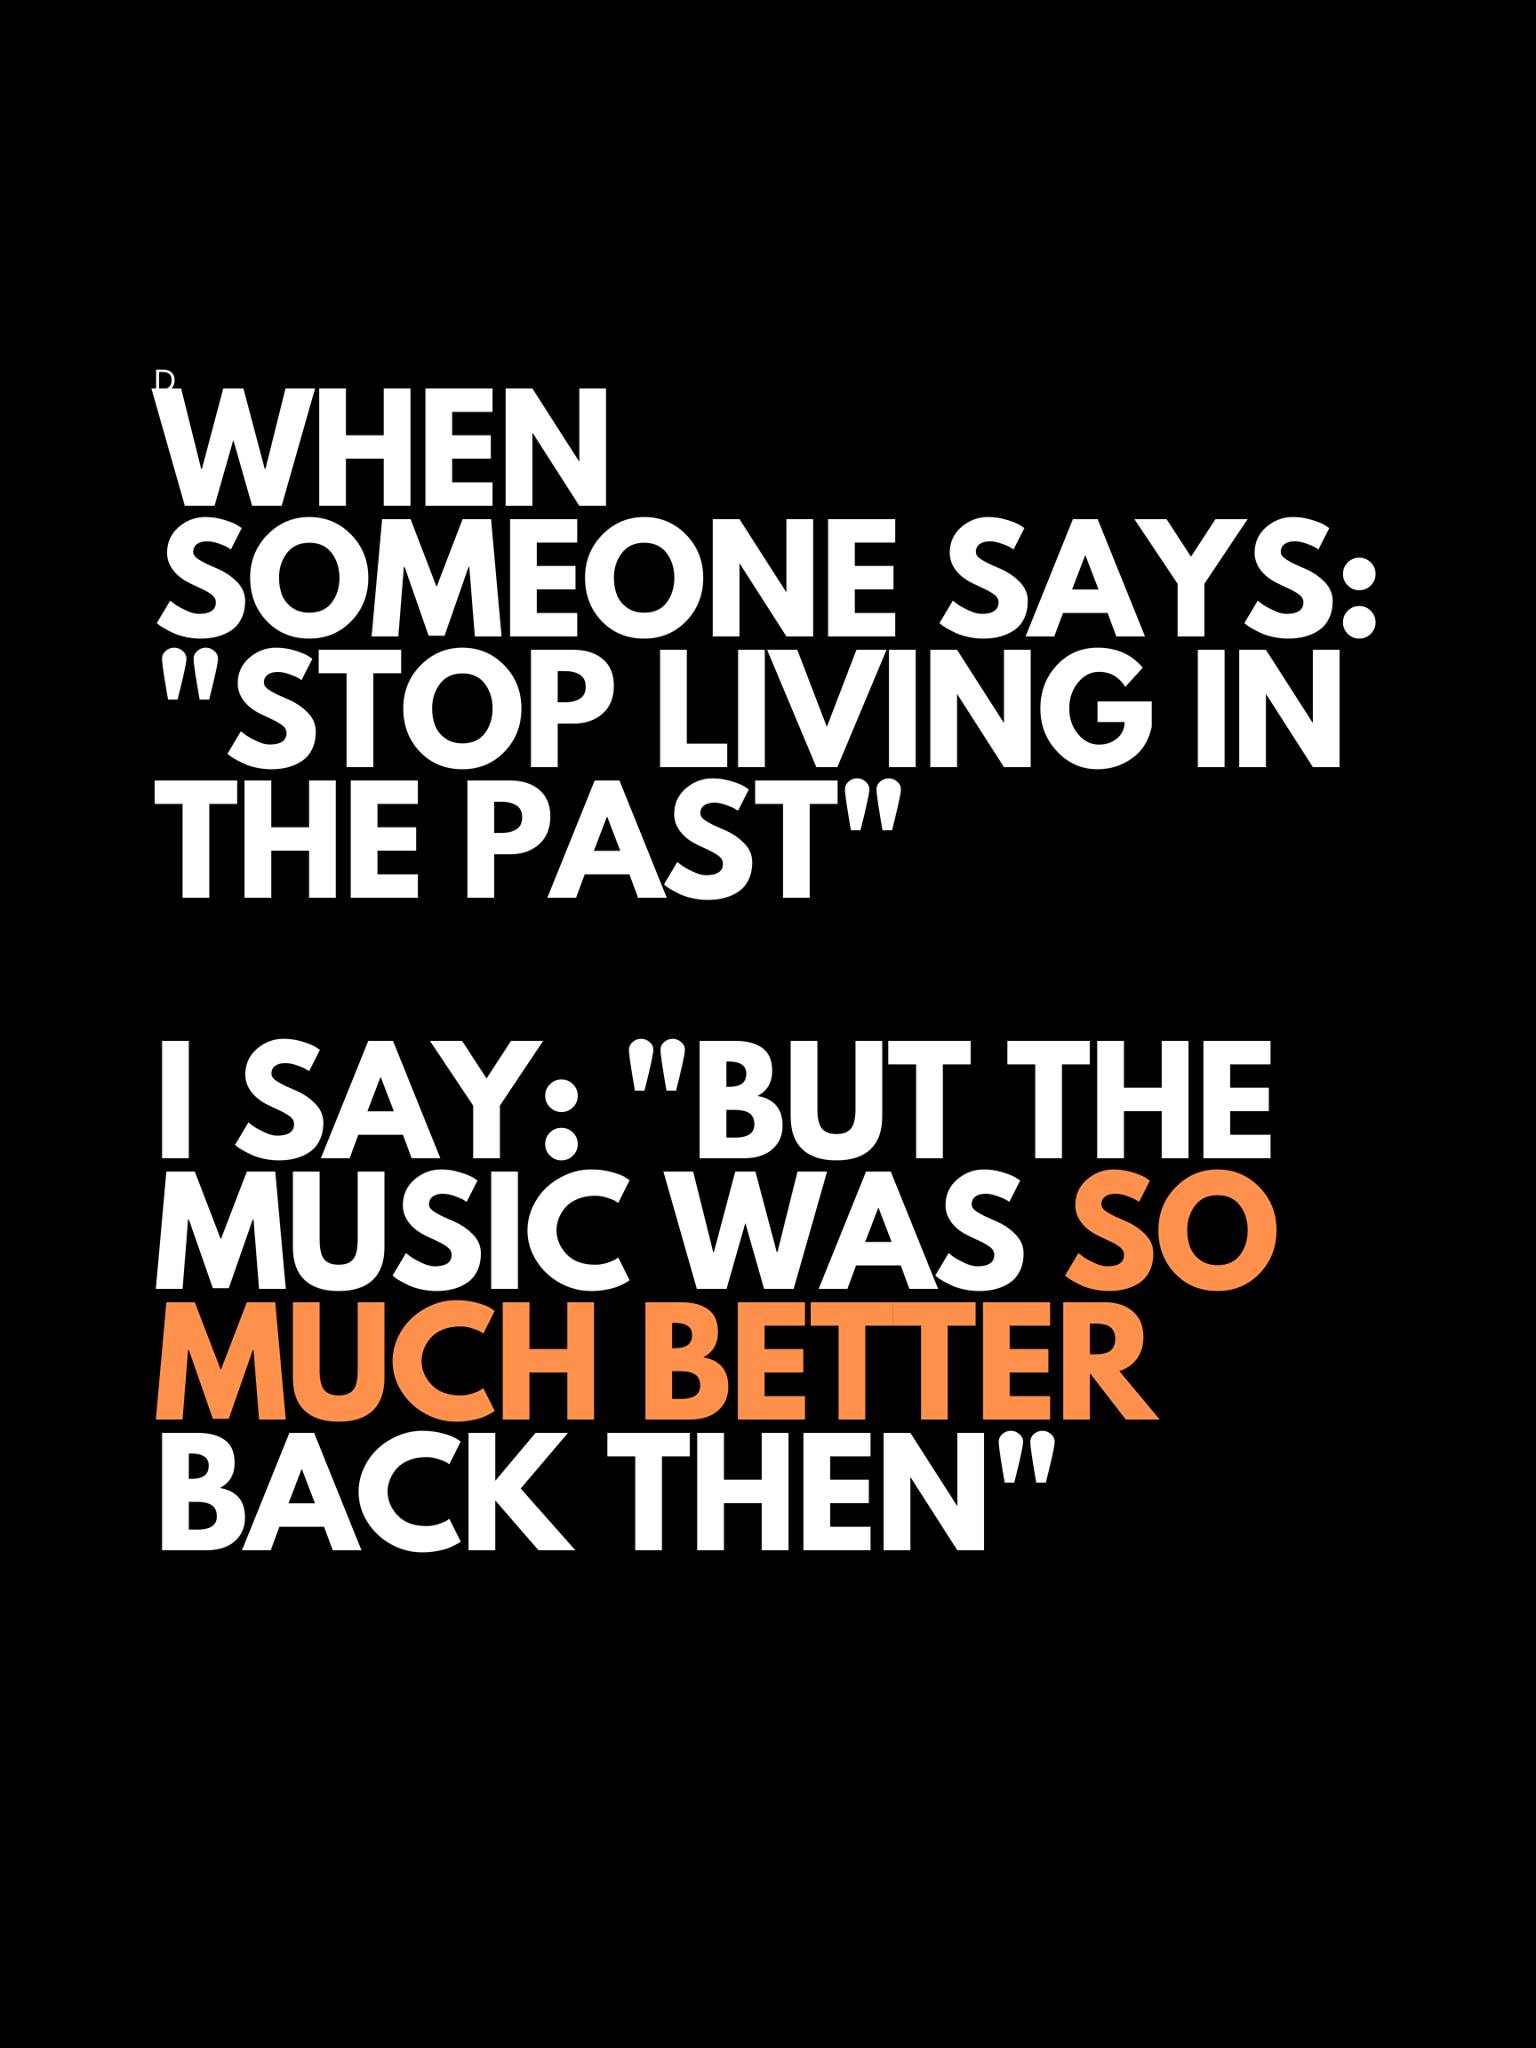 when someone says stop living in the past, i saw, but the music was so much better back then